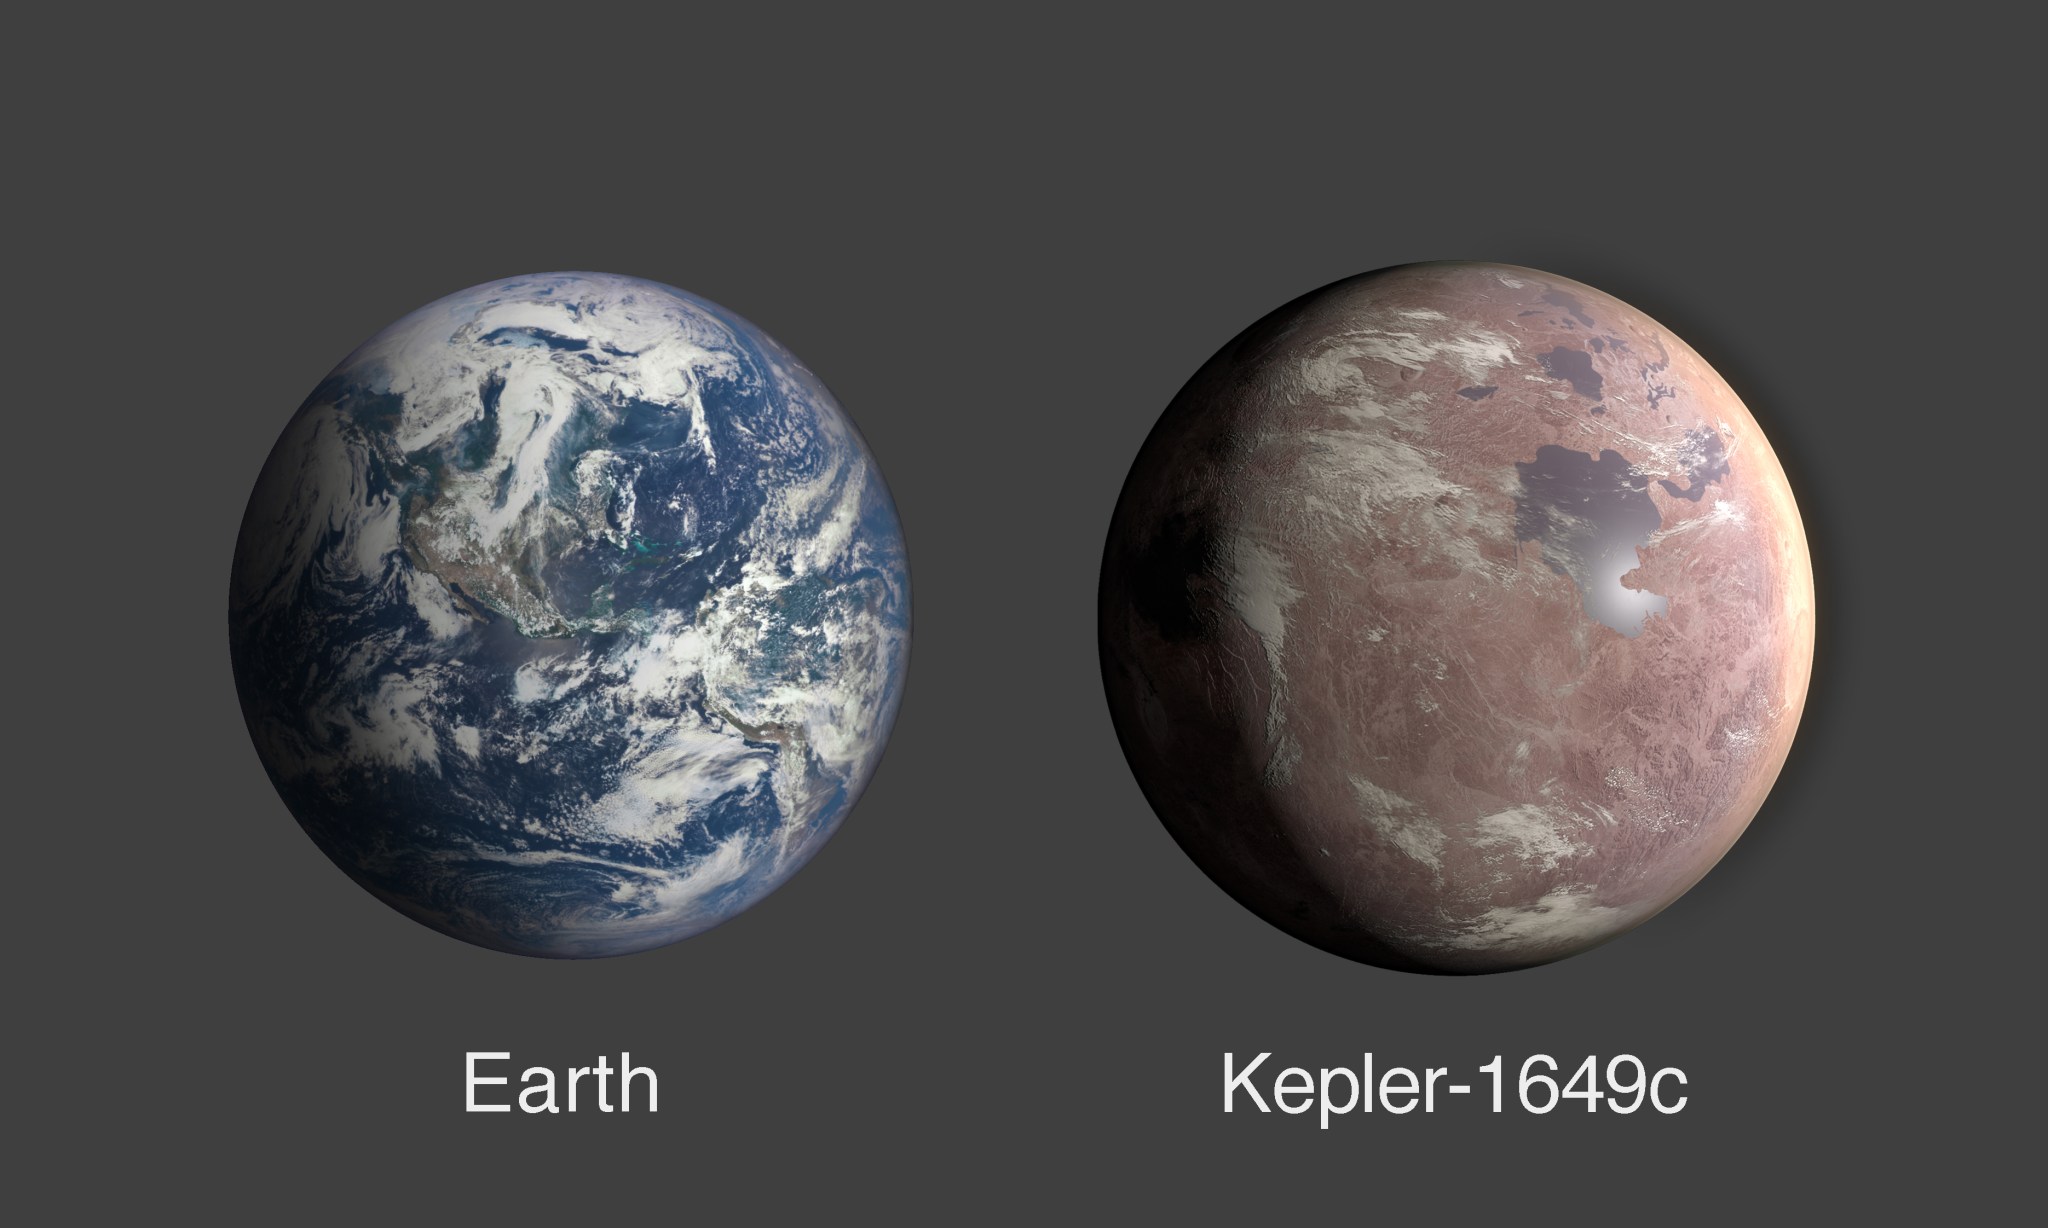 A comparison of Earth and Kepler-1649c, an exoplanet only 1.06 times Earth's radius